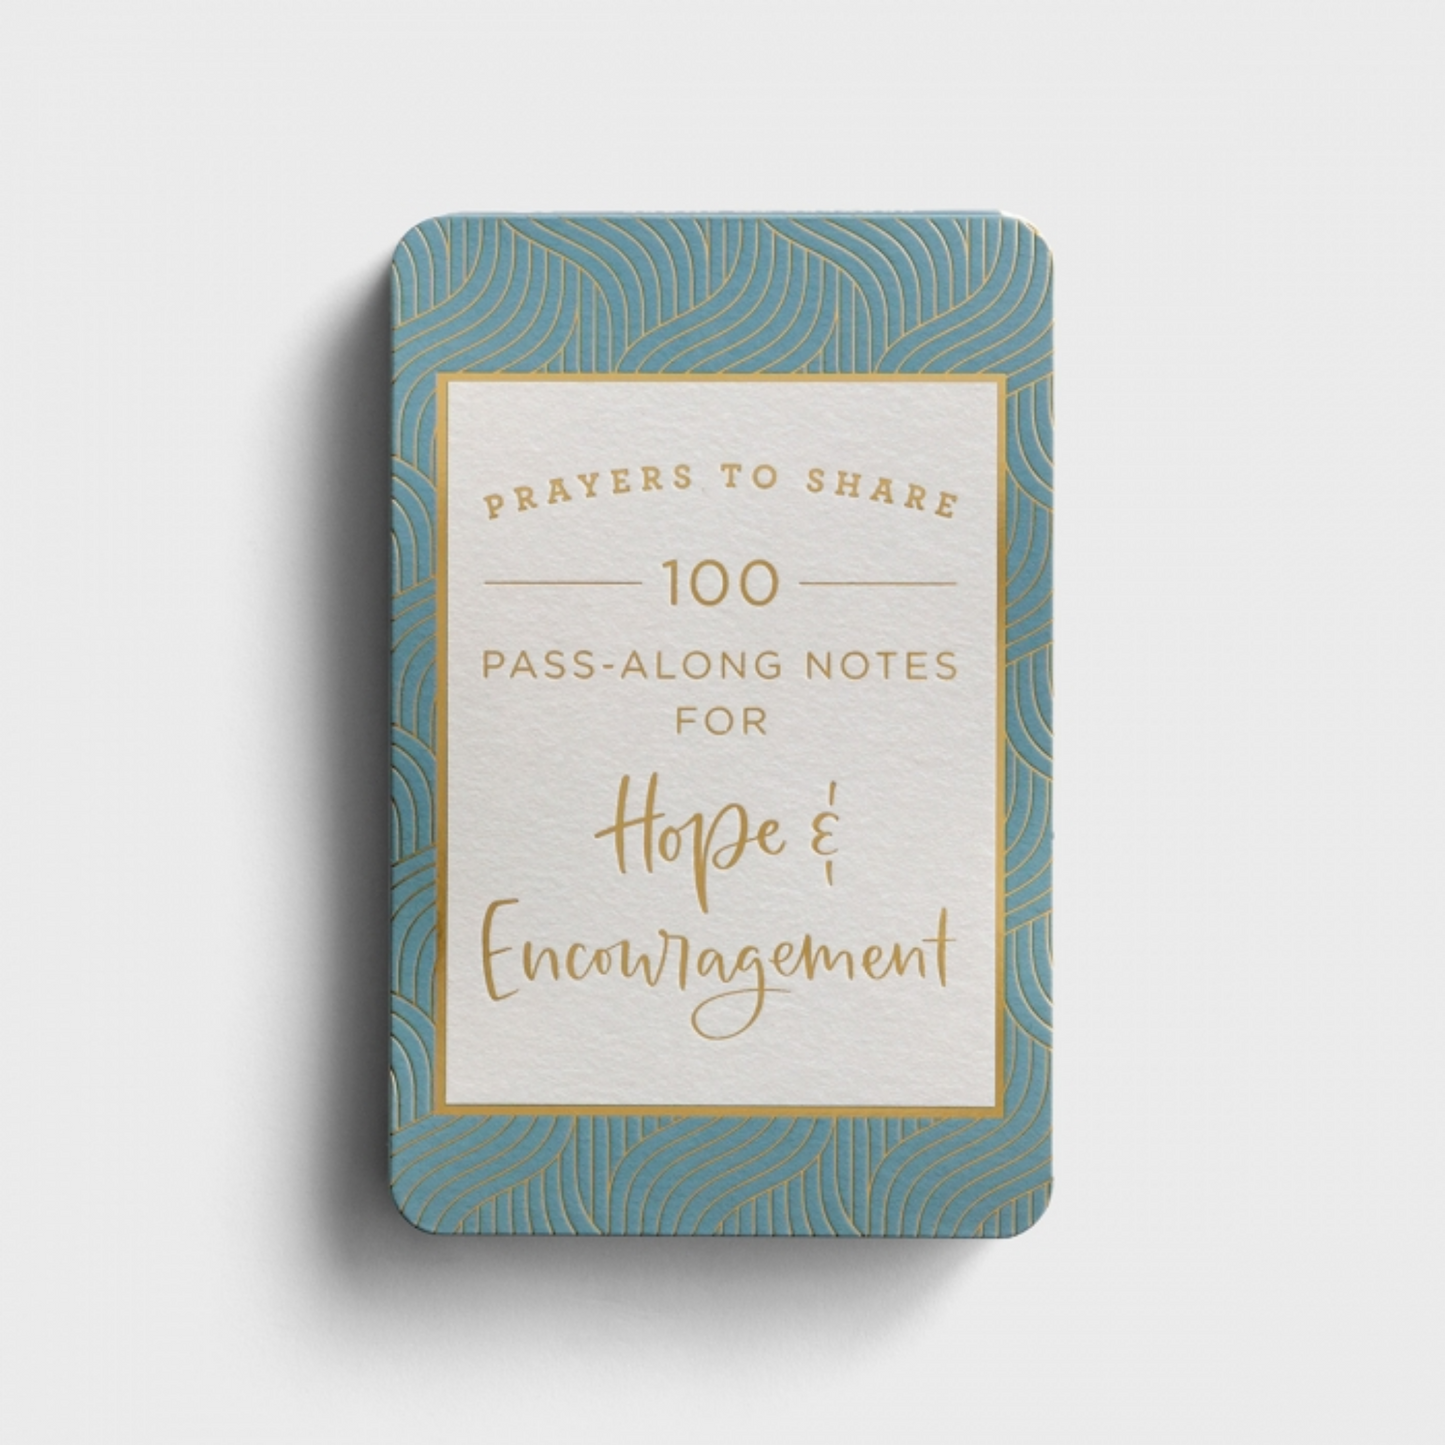 Prayers to Share: 100 Pass-Along Notes For Hope & Encouragement (#J6928)